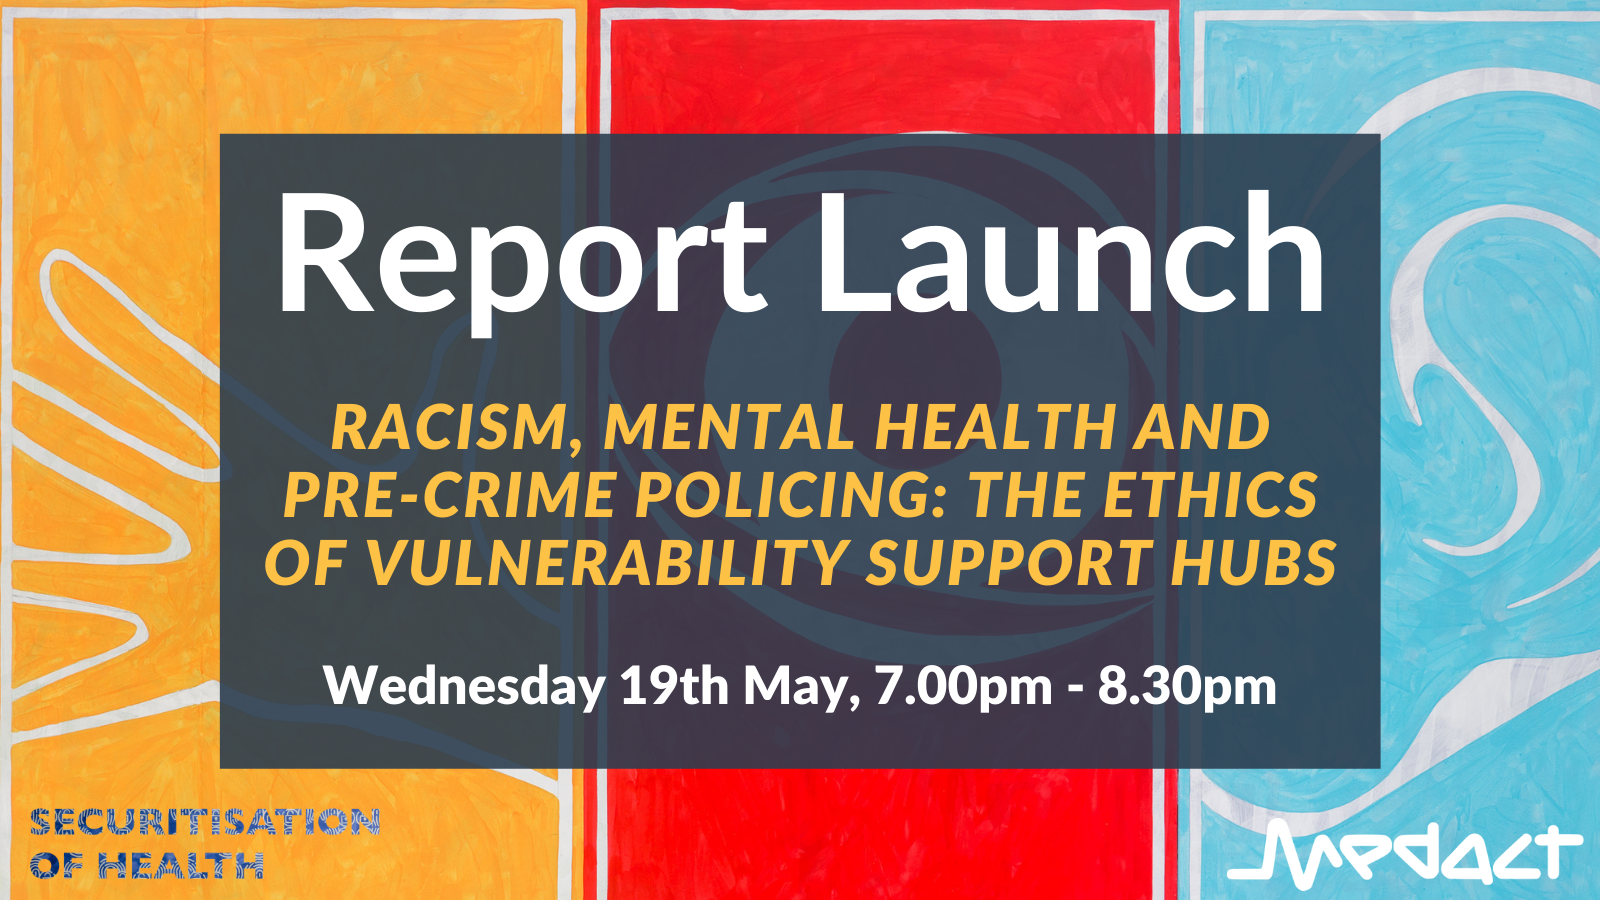 Racism, mental health and pre-crime policing: the ethics of Vulnerability Support Hubs (report launch)